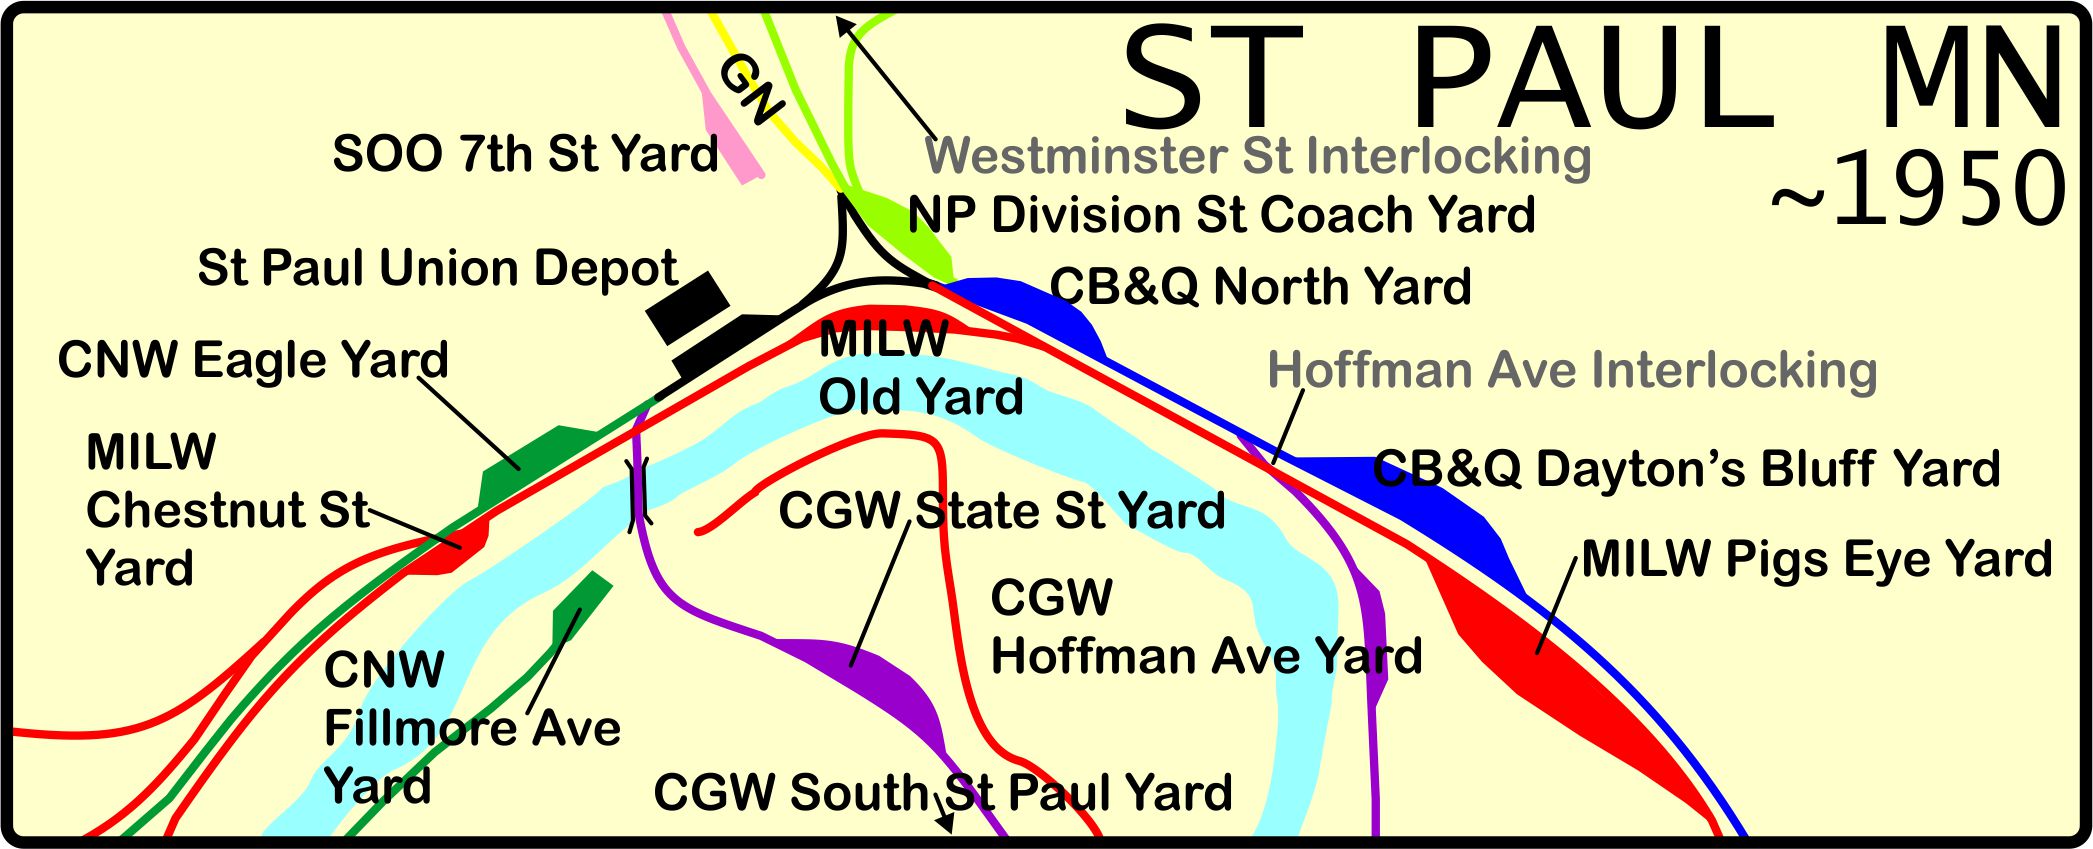 Map and Directions to Ray And Platform in Saint Paul, MN